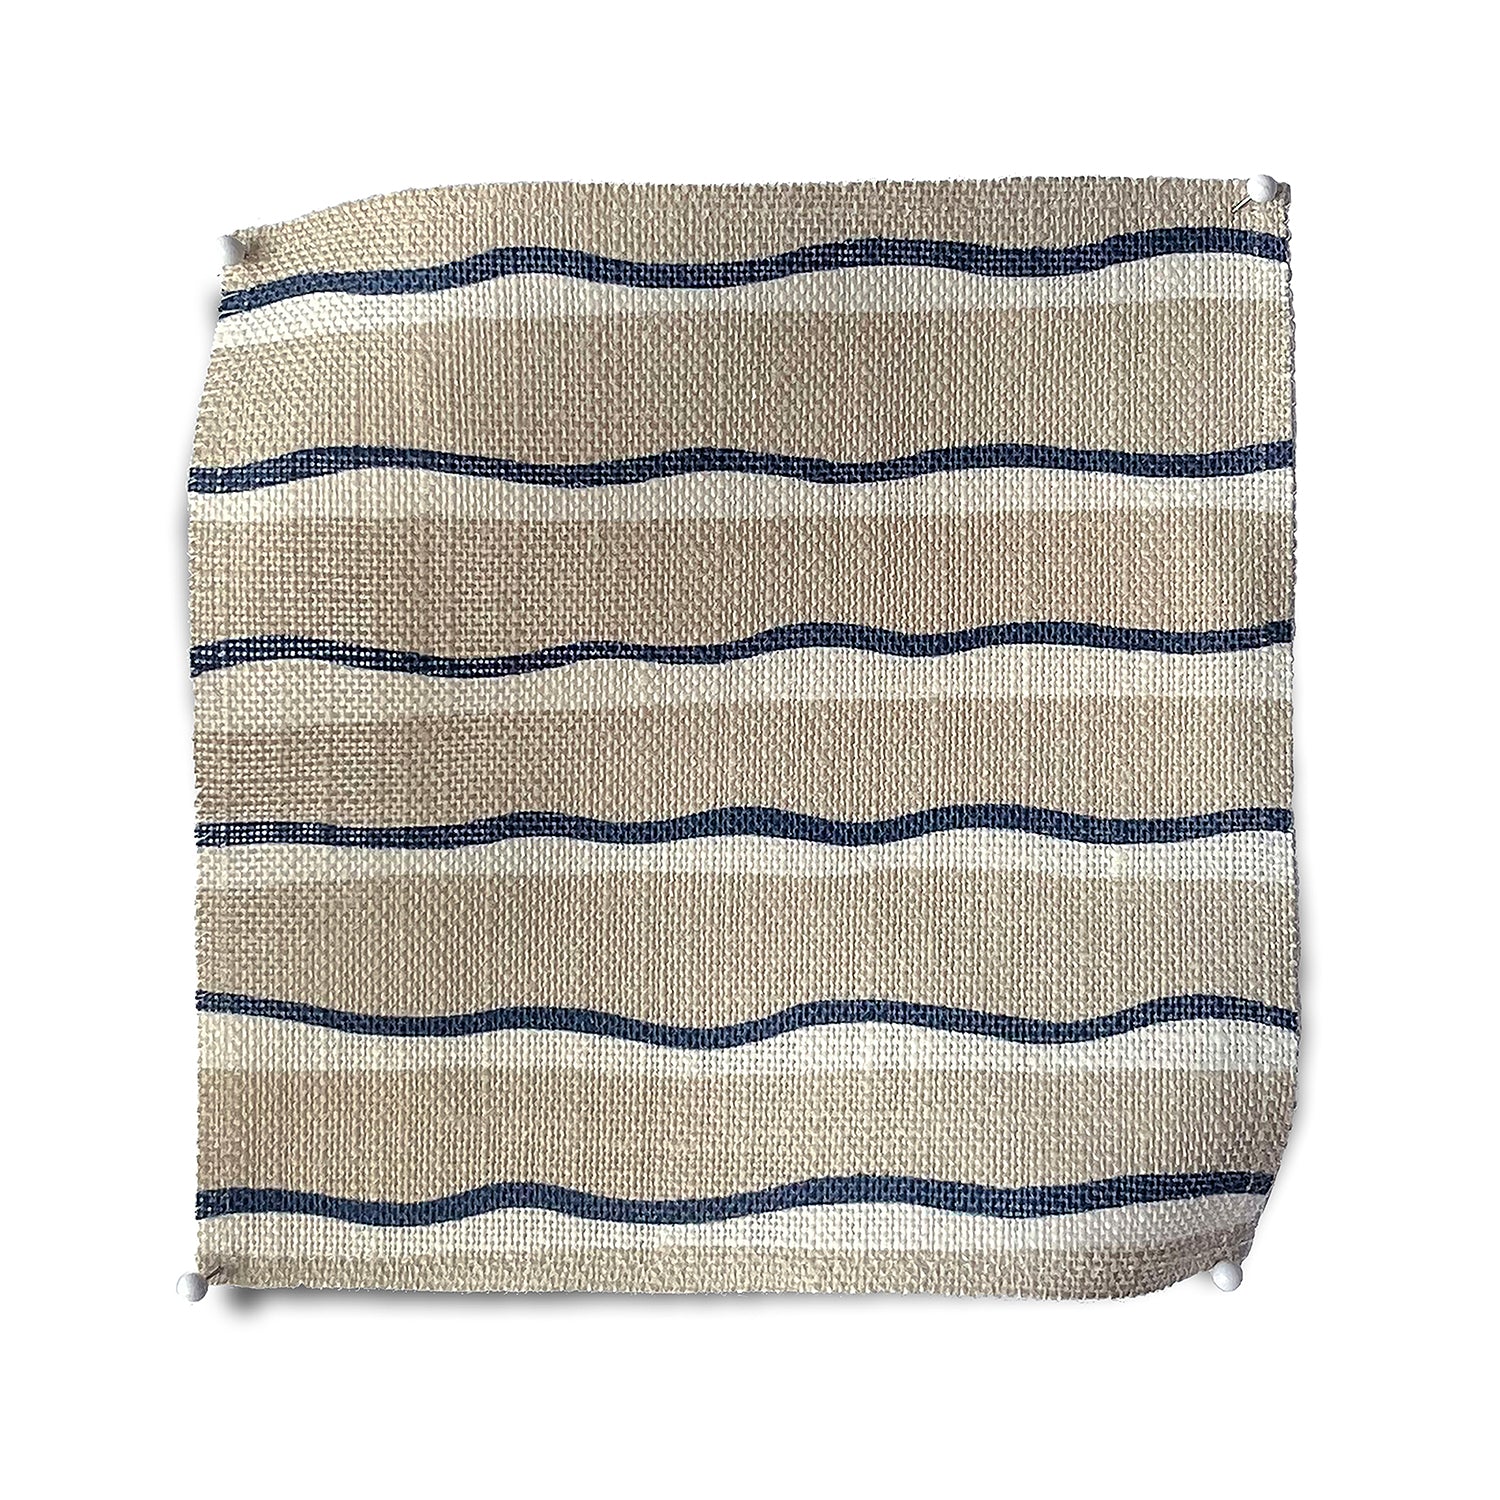 Square fabric swatch in an undulating stripe pattern in navy and white on a cream field.